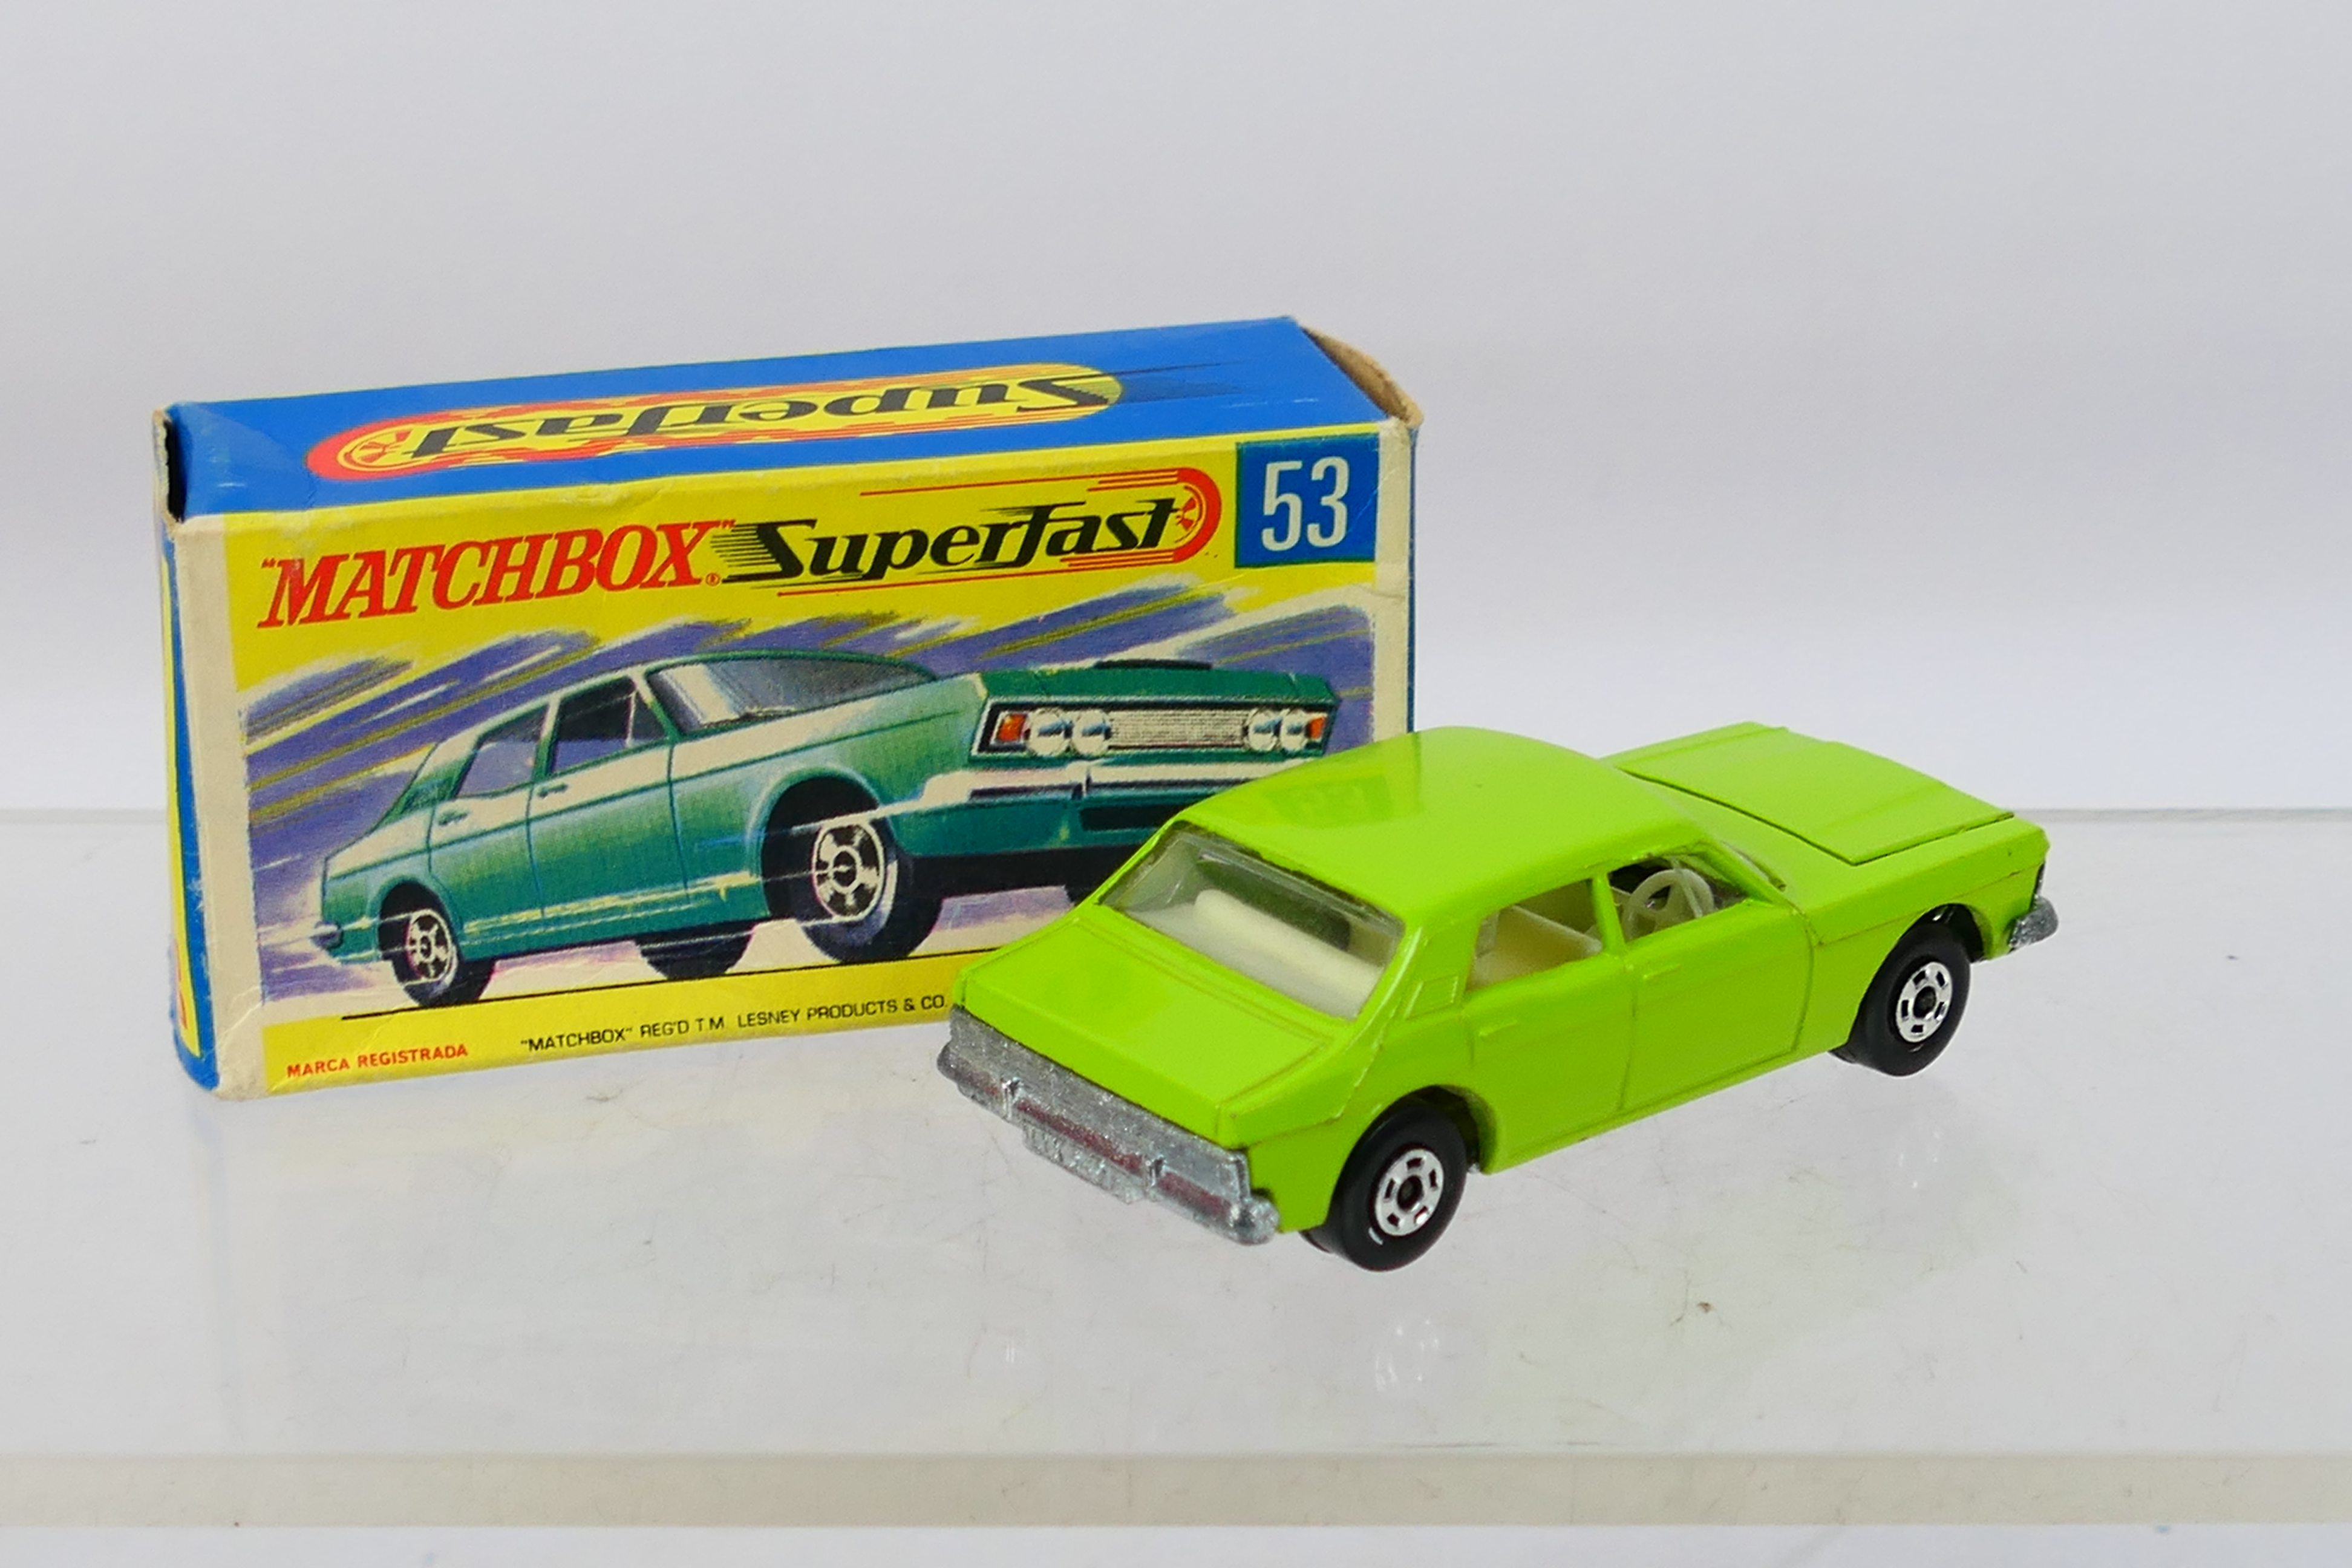 Matchbox - Superfast - A rare boxed Ford Zodiac in lime green with wide wheels # 53. - Image 2 of 5